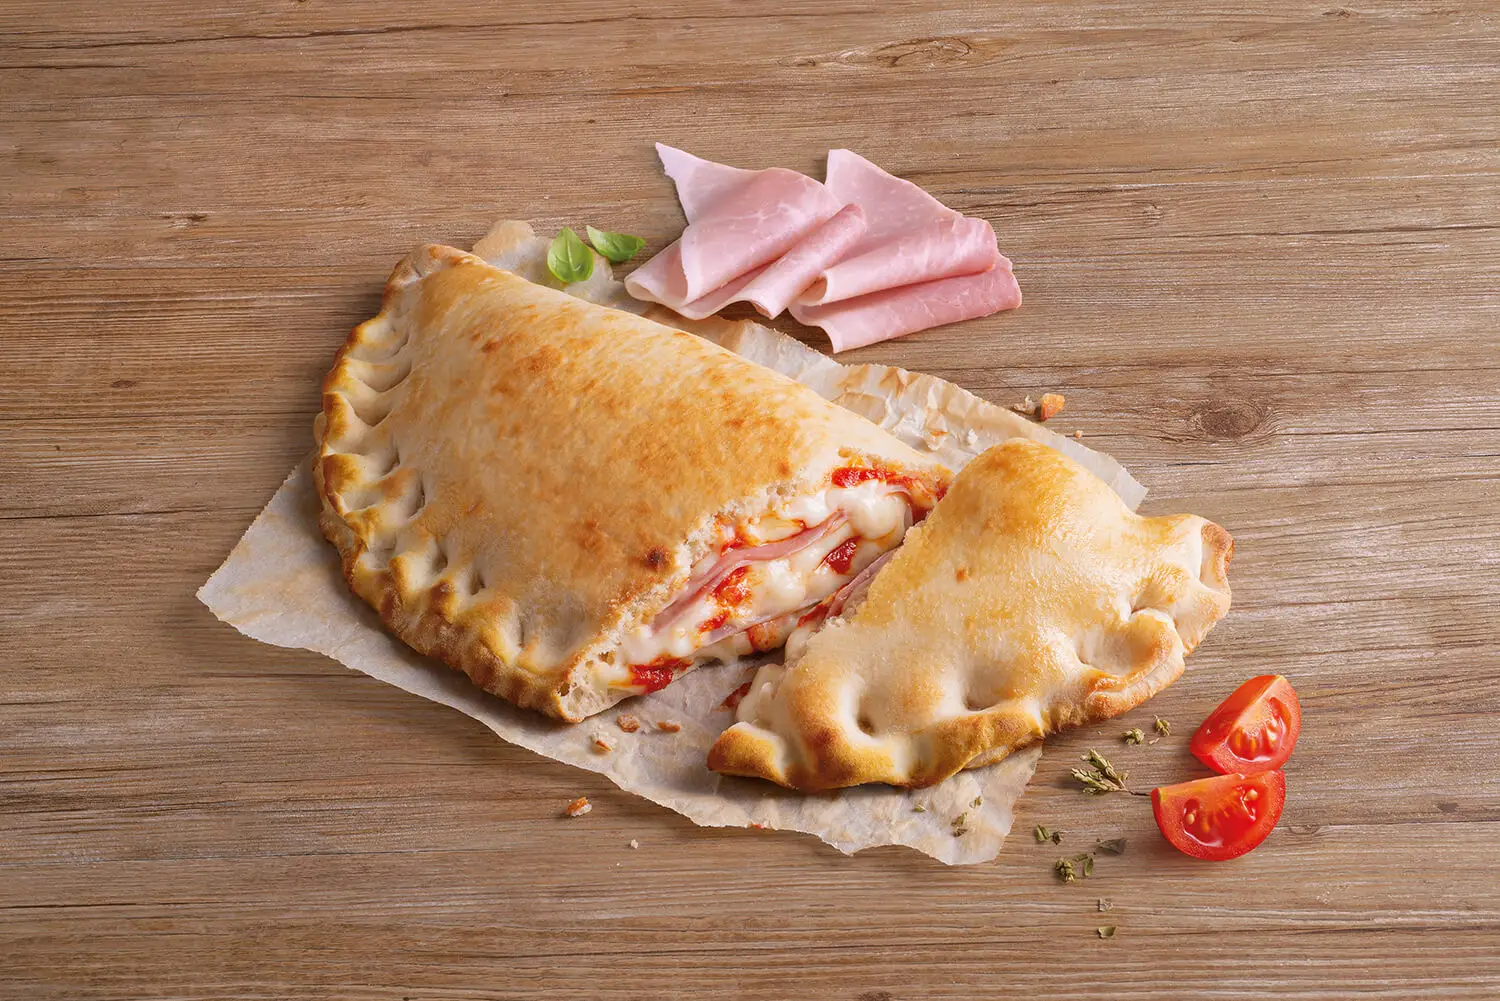 Calzone with baked ham